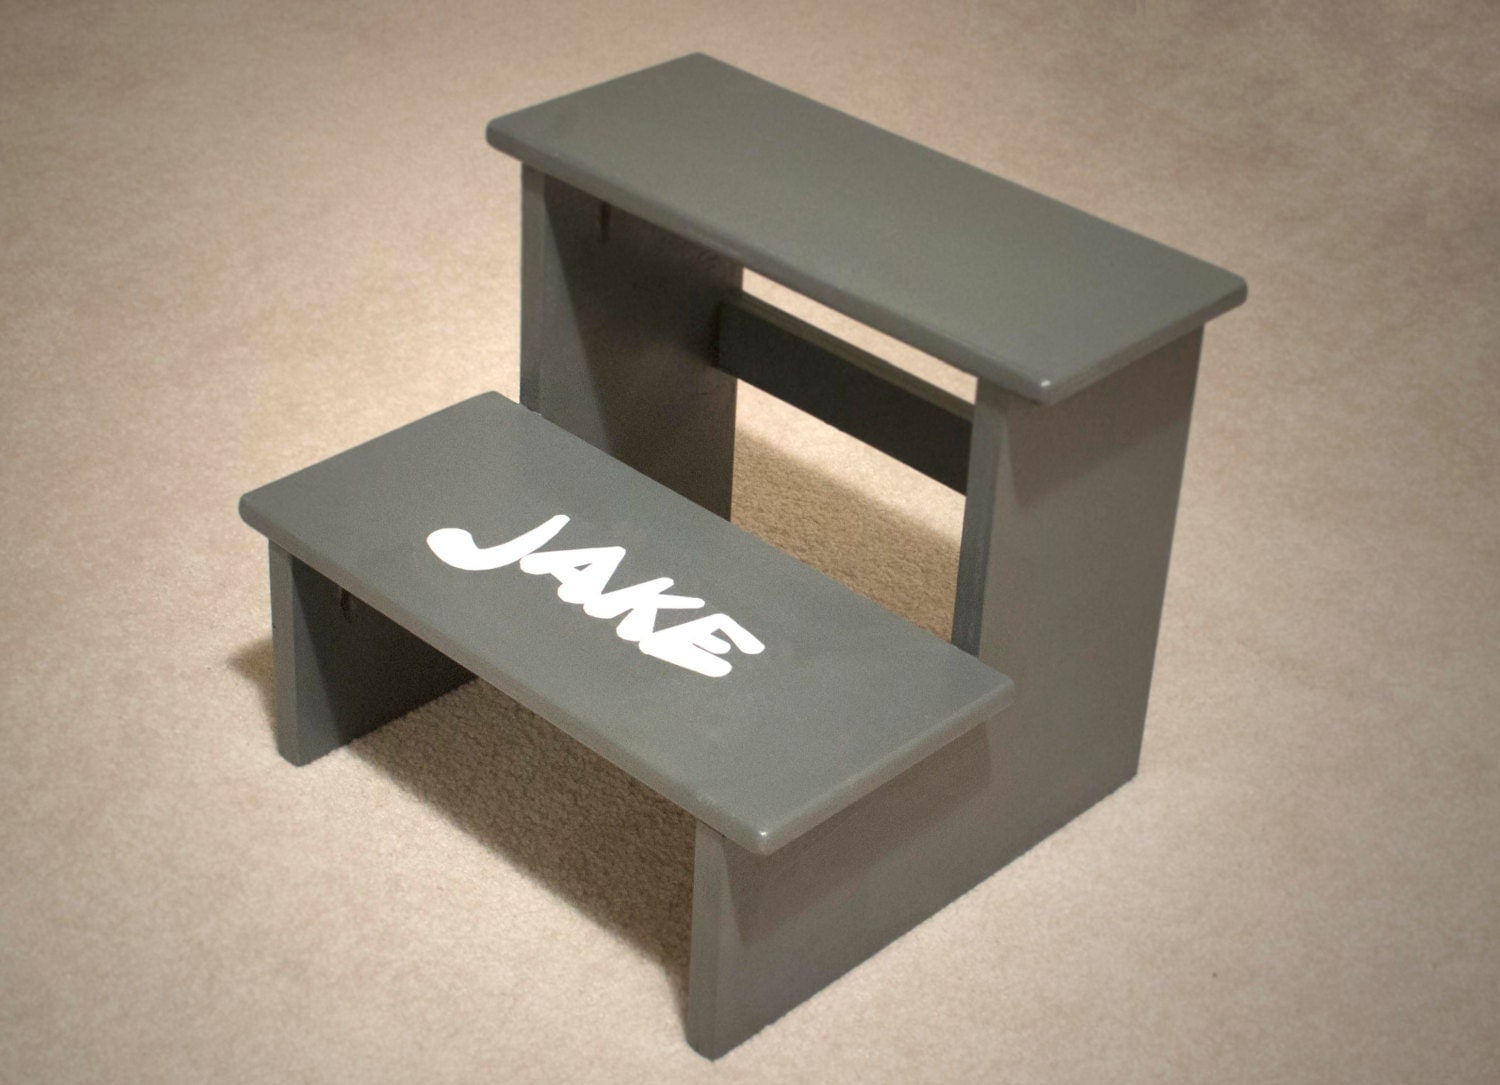 Personalized Kids Step Stool Full custom design and colors